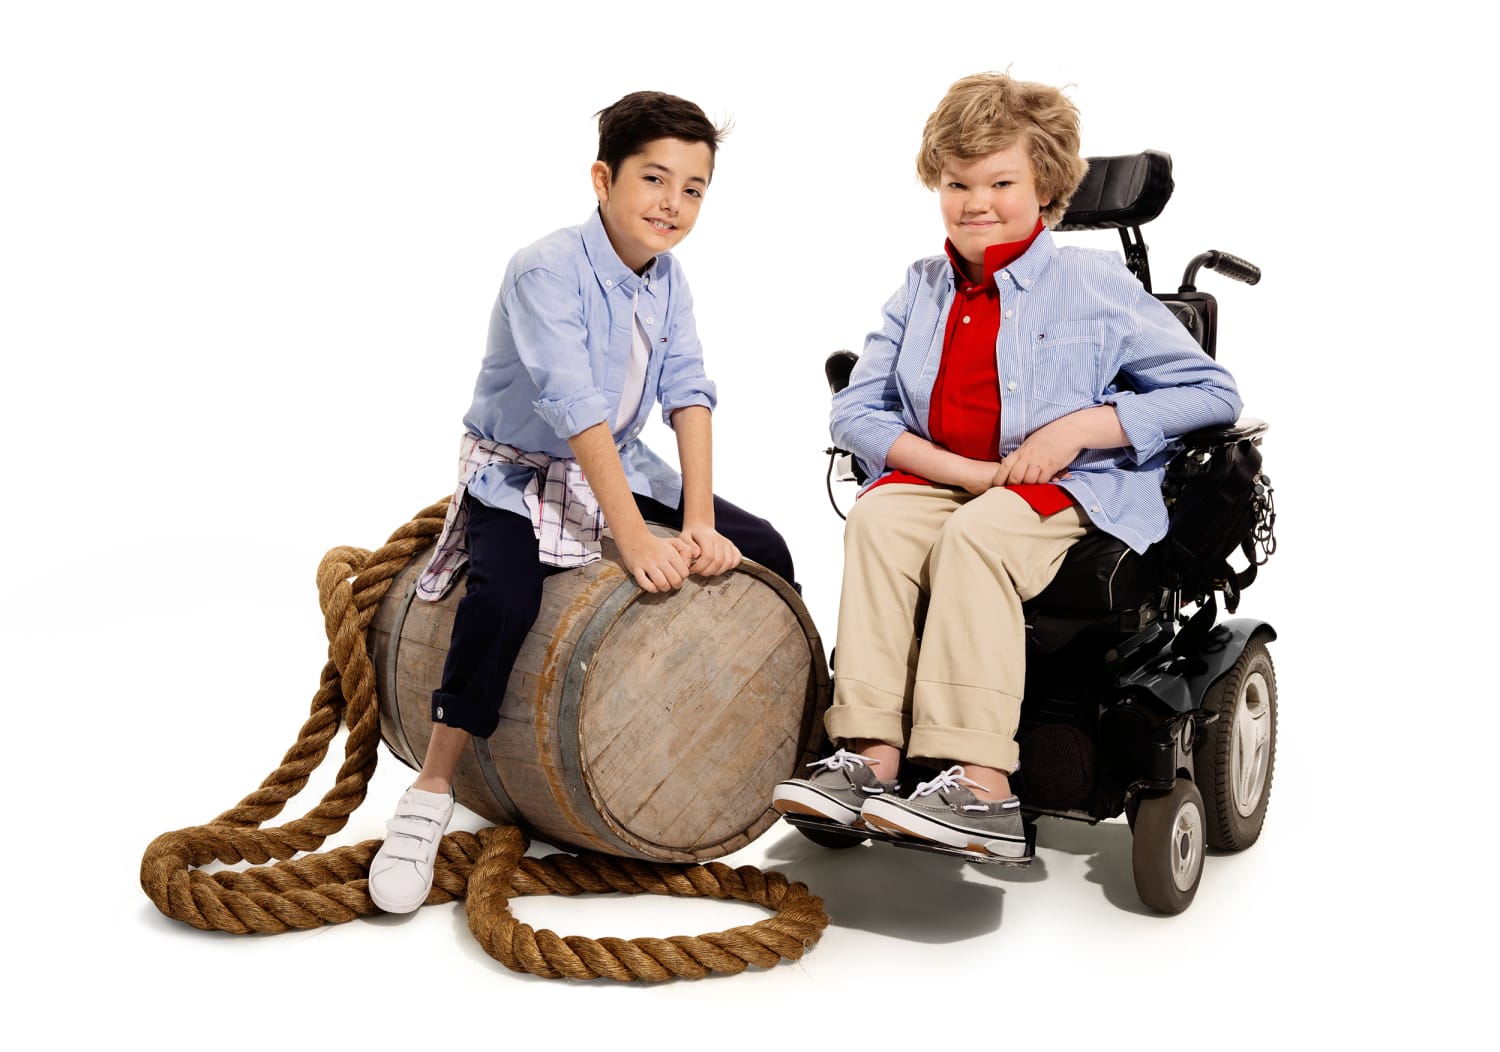 Tommy Hilfiger launches line for disabilities